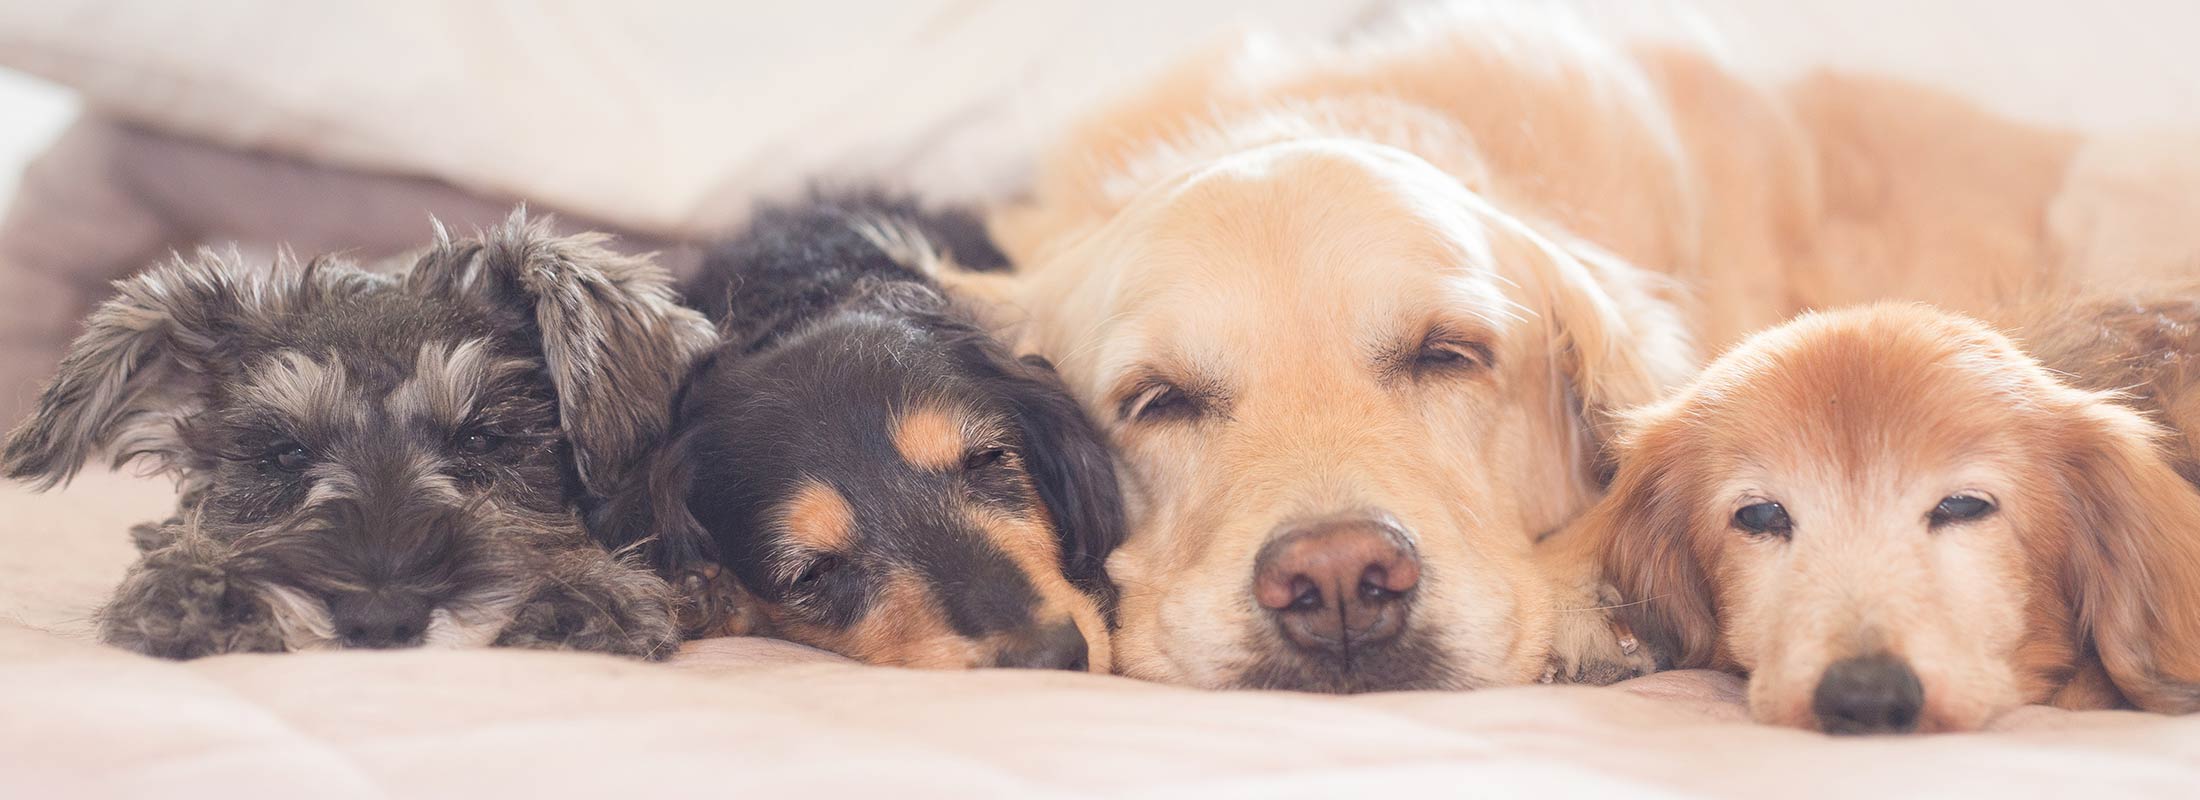 image of cute dogs sleeping together